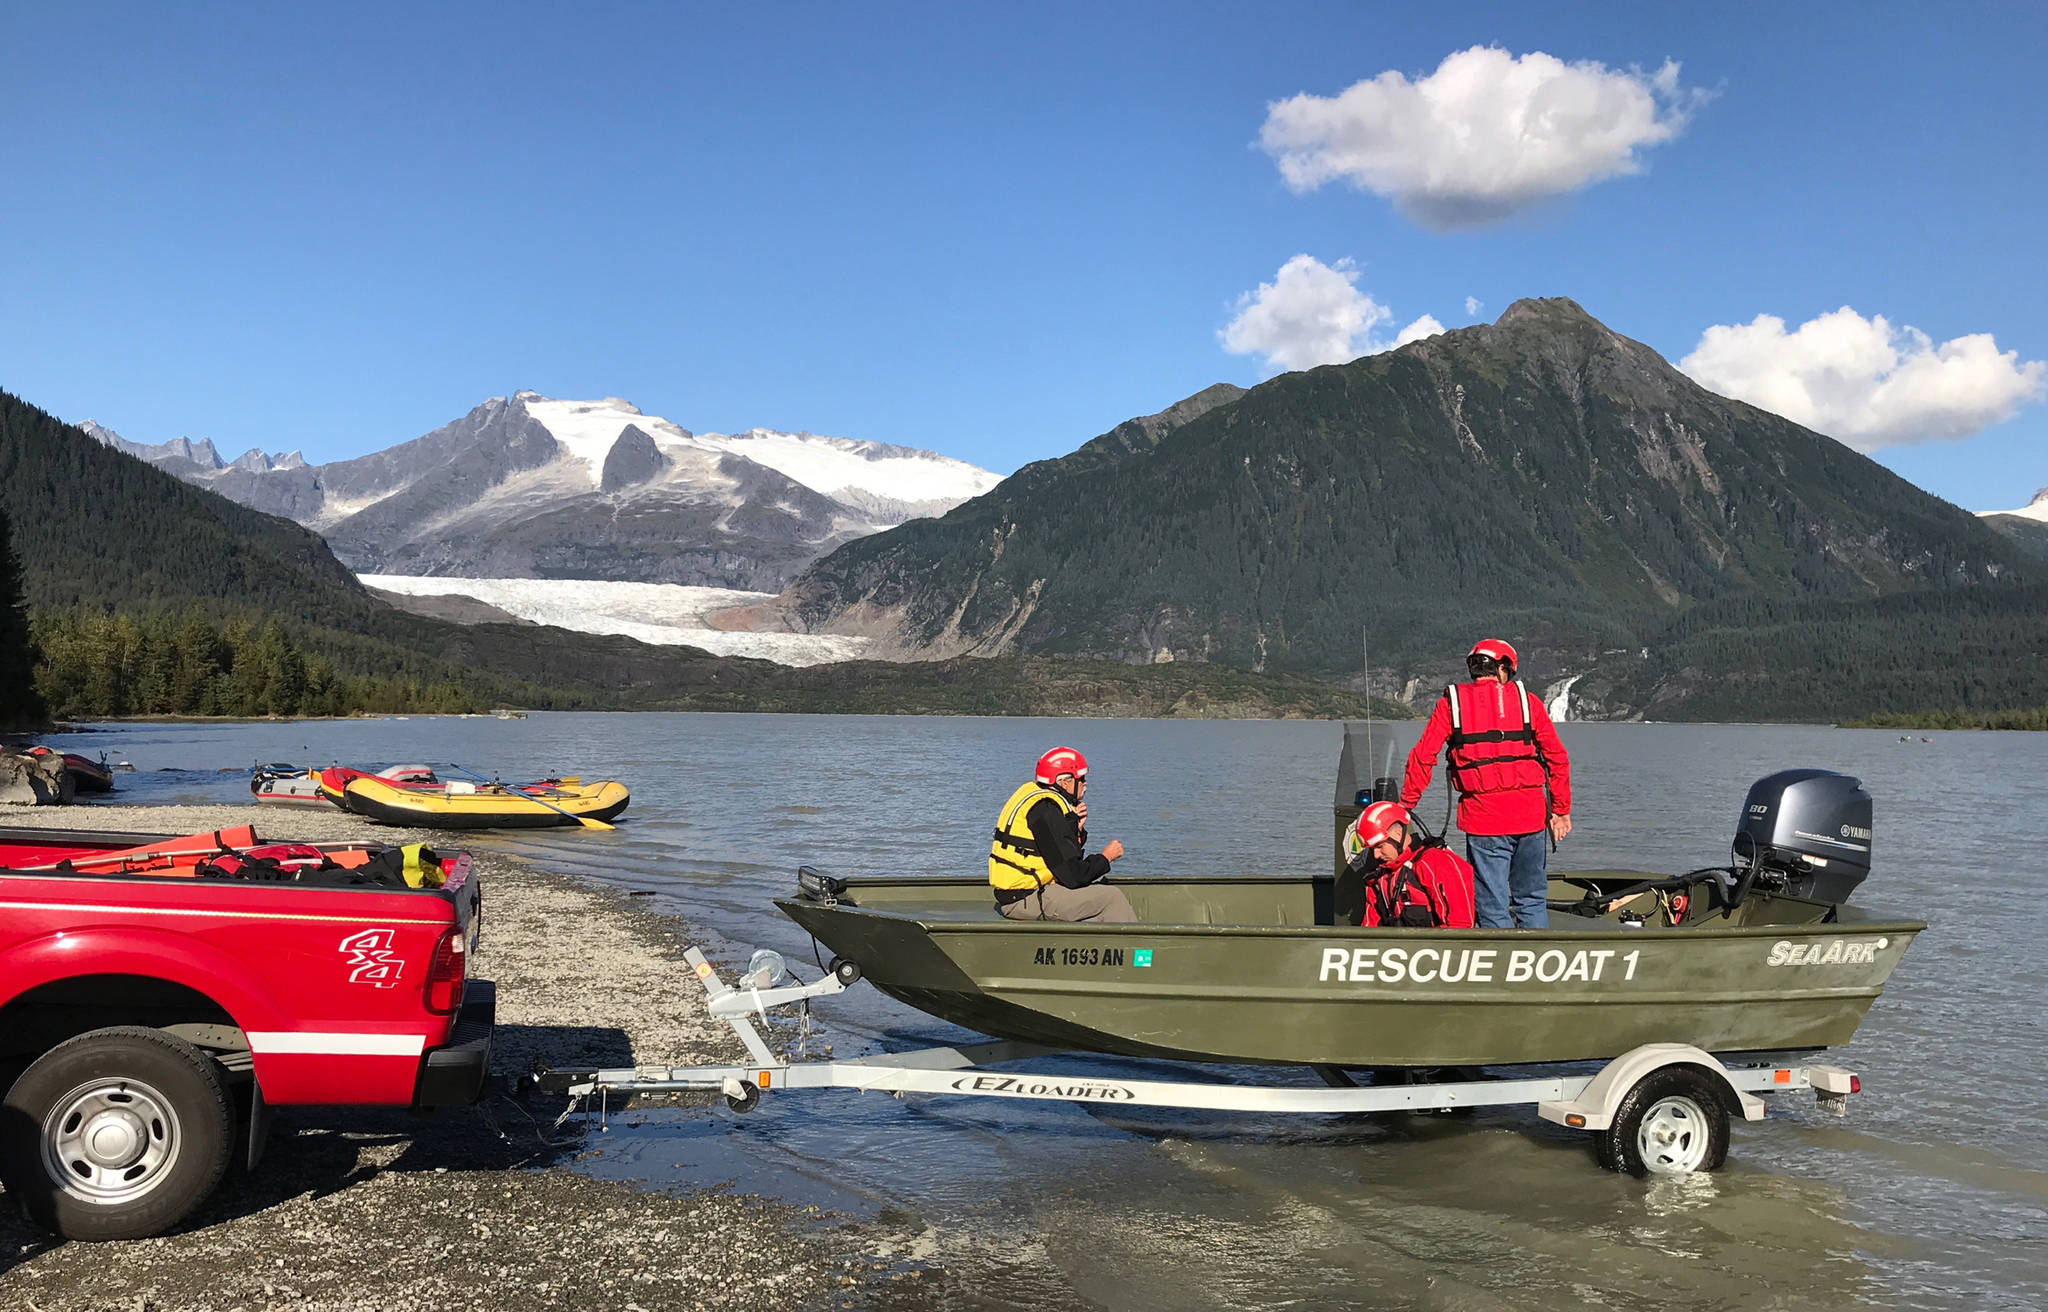 Capital City Fire/Rescue launches their rescue boat to rescue David Hill, of Dallas, Texas, after he capsized in kayak in front of the Mendenhall Glacier on Tuesday, Sept. 4, 2018. (Michael Penn | Juneau Empire)